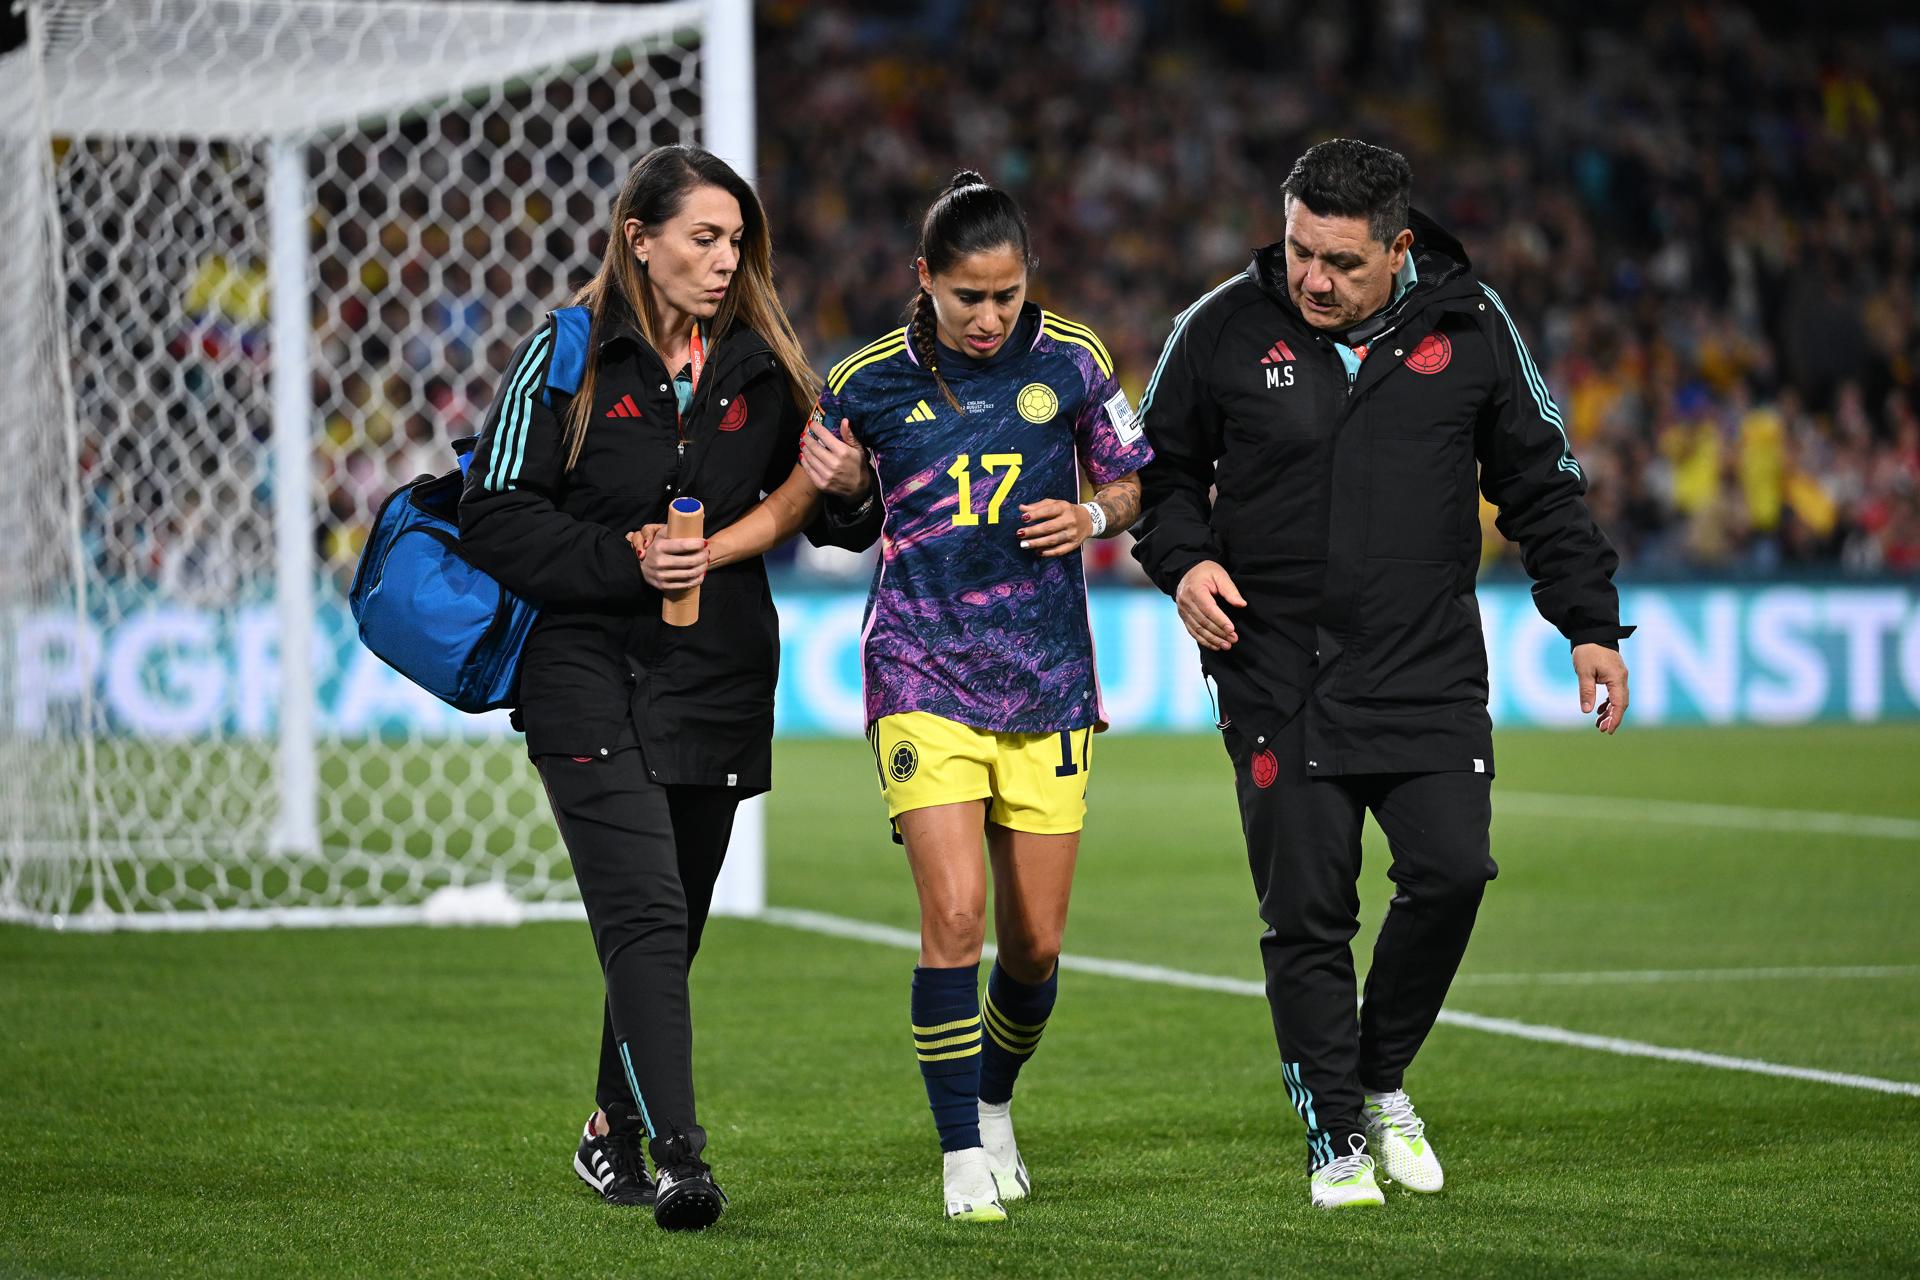 Defender Carolina Arias of Colombia exits the field after sustaining an injury during a FIFA Women's World Cup 2023 quarterfinal soccer match between England and Colombia at Stadium Australia in Sydney, Australia, 12 August 2023. EFE/EPA/DEAN LEWINS AUSTRALIA AND NEW ZEALAND OUT
